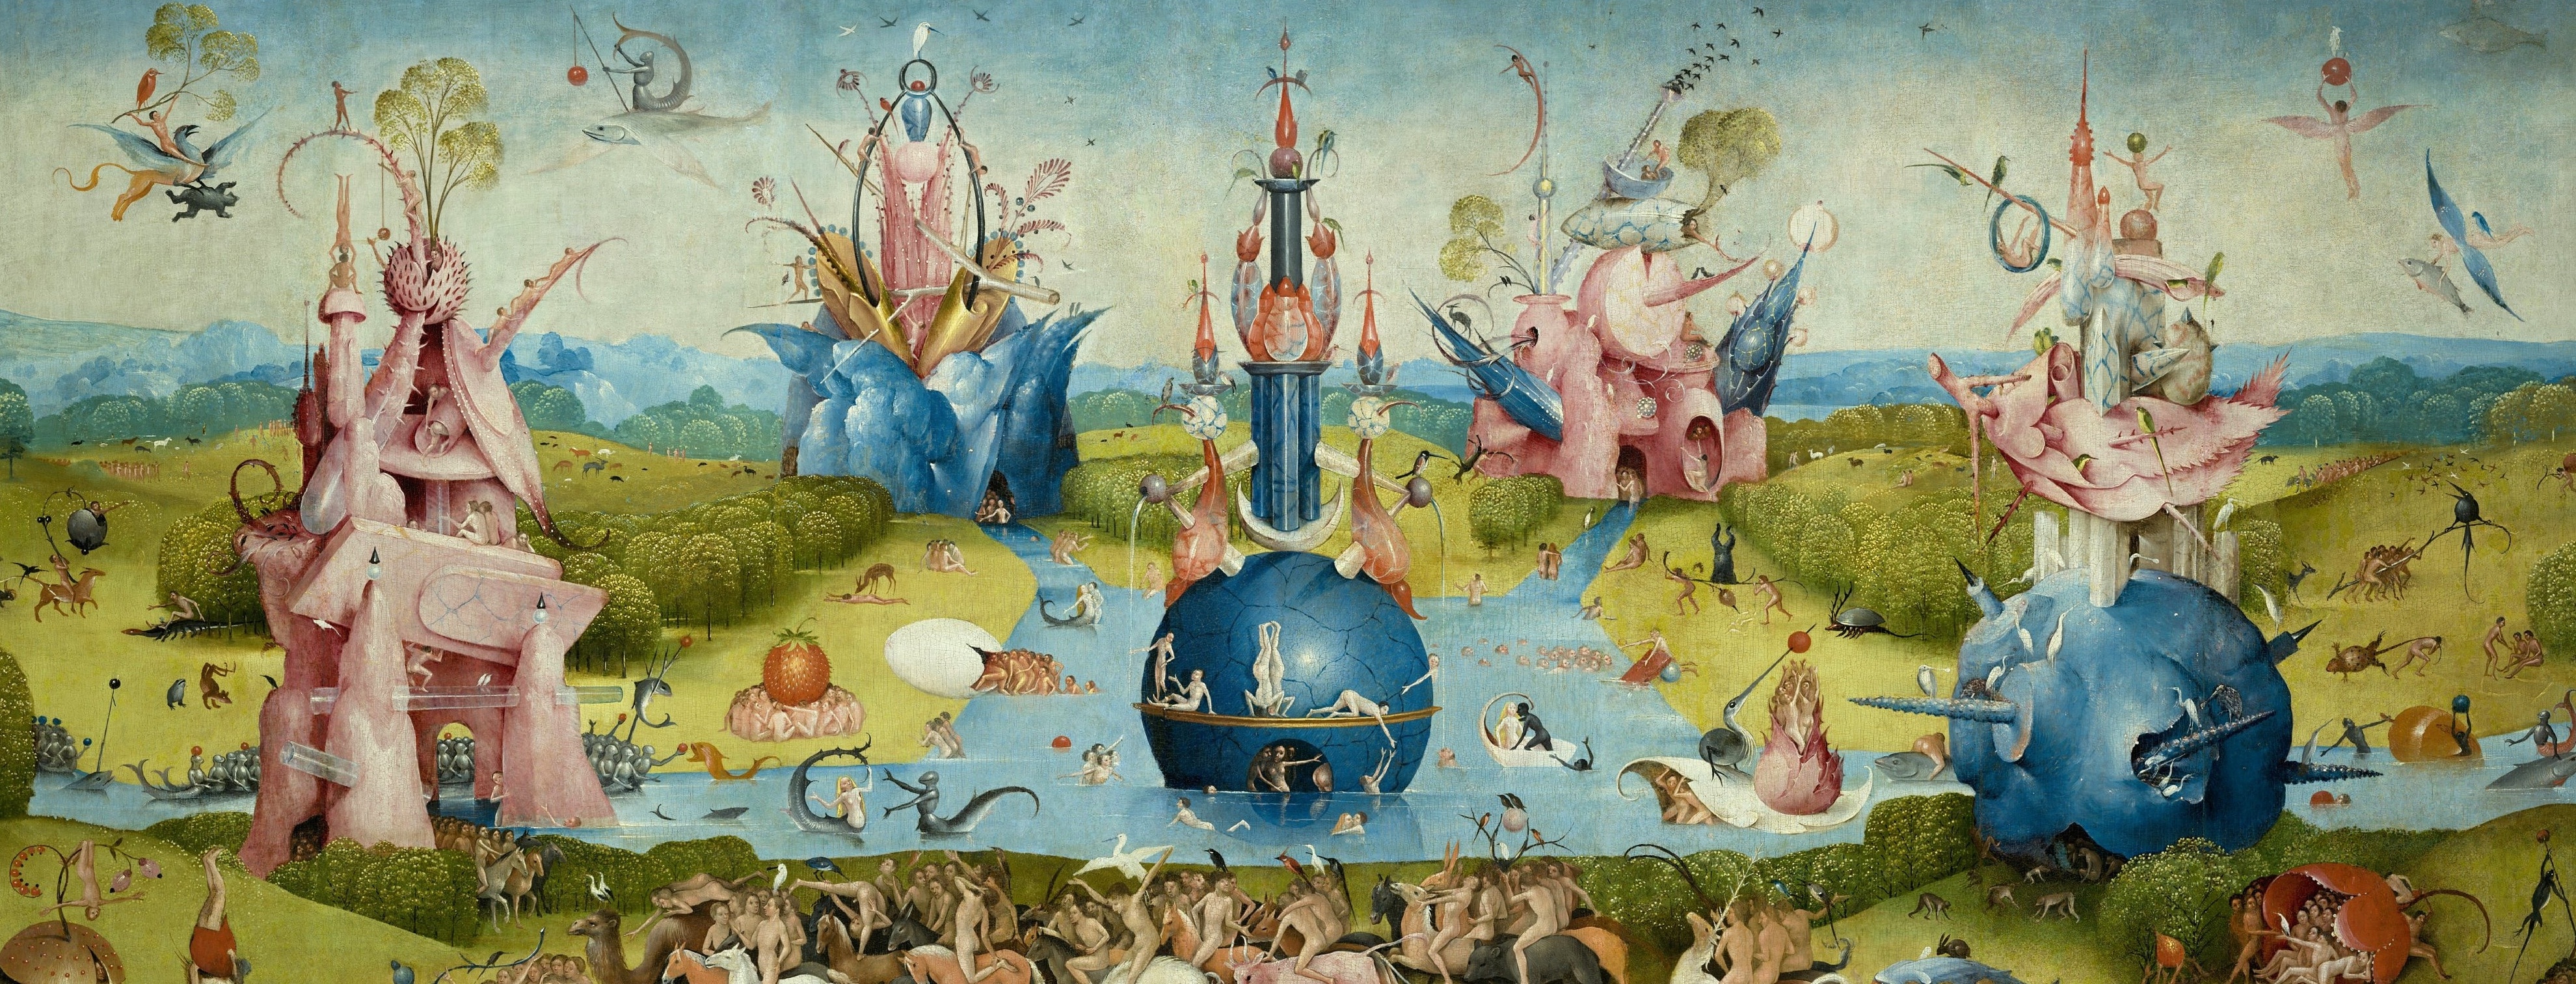 earthly garden bosch delights hieronymus resolution well apps cultured four bbva